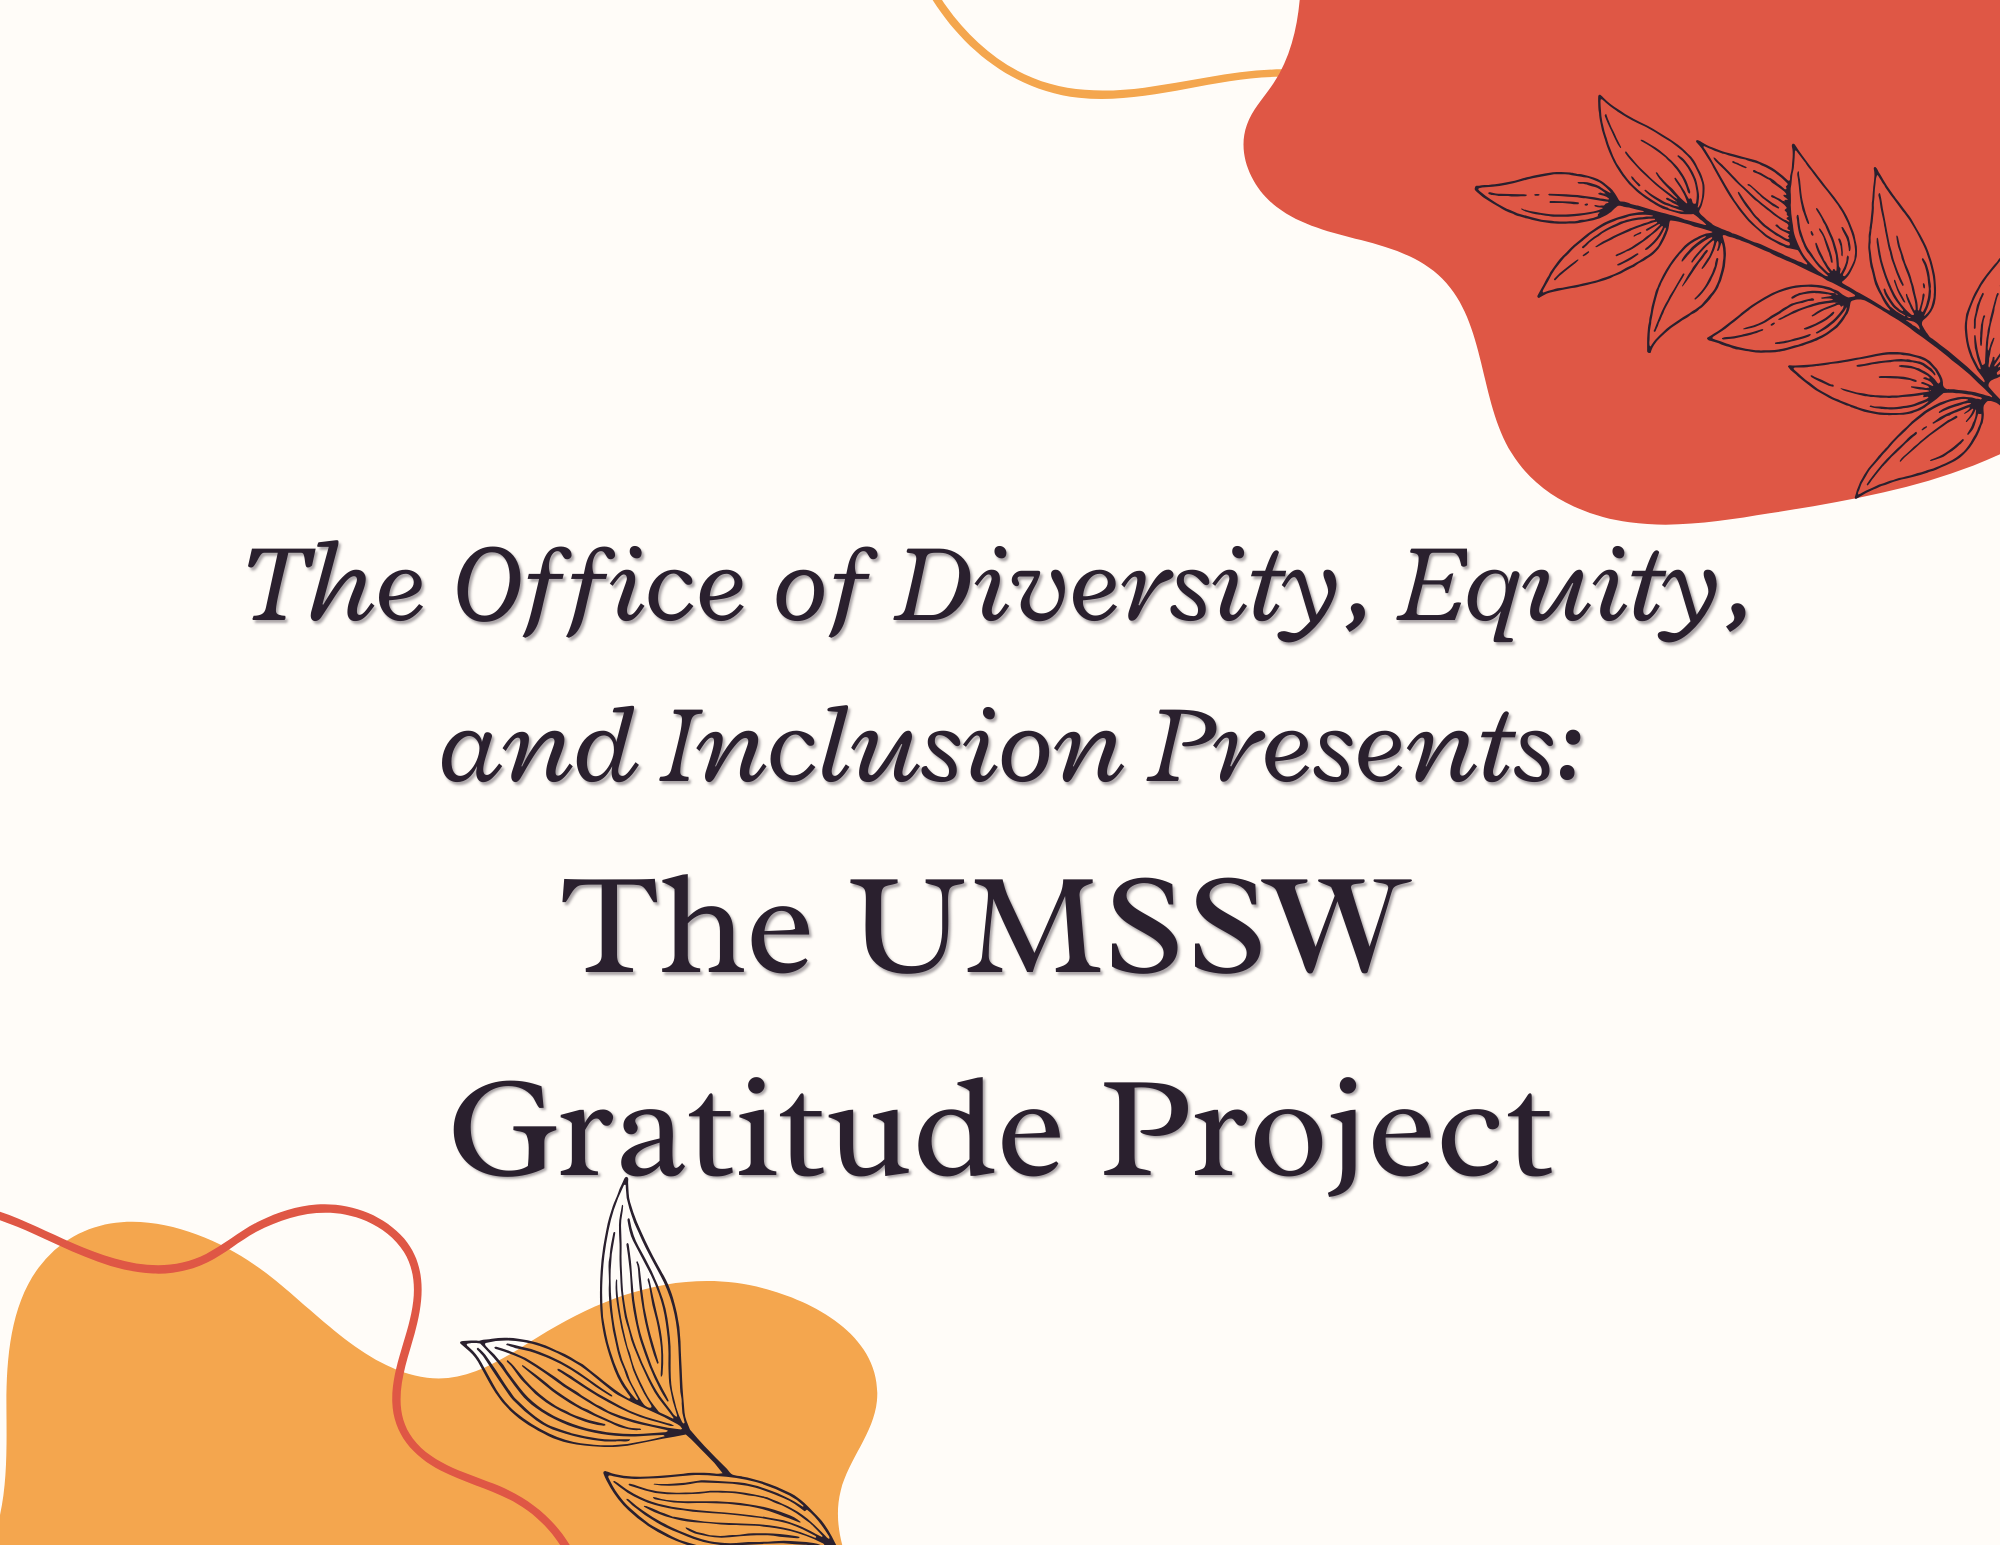 The Office of Diversity, Equity, and Inclusion Presents: The UMSSW Gratitude Project